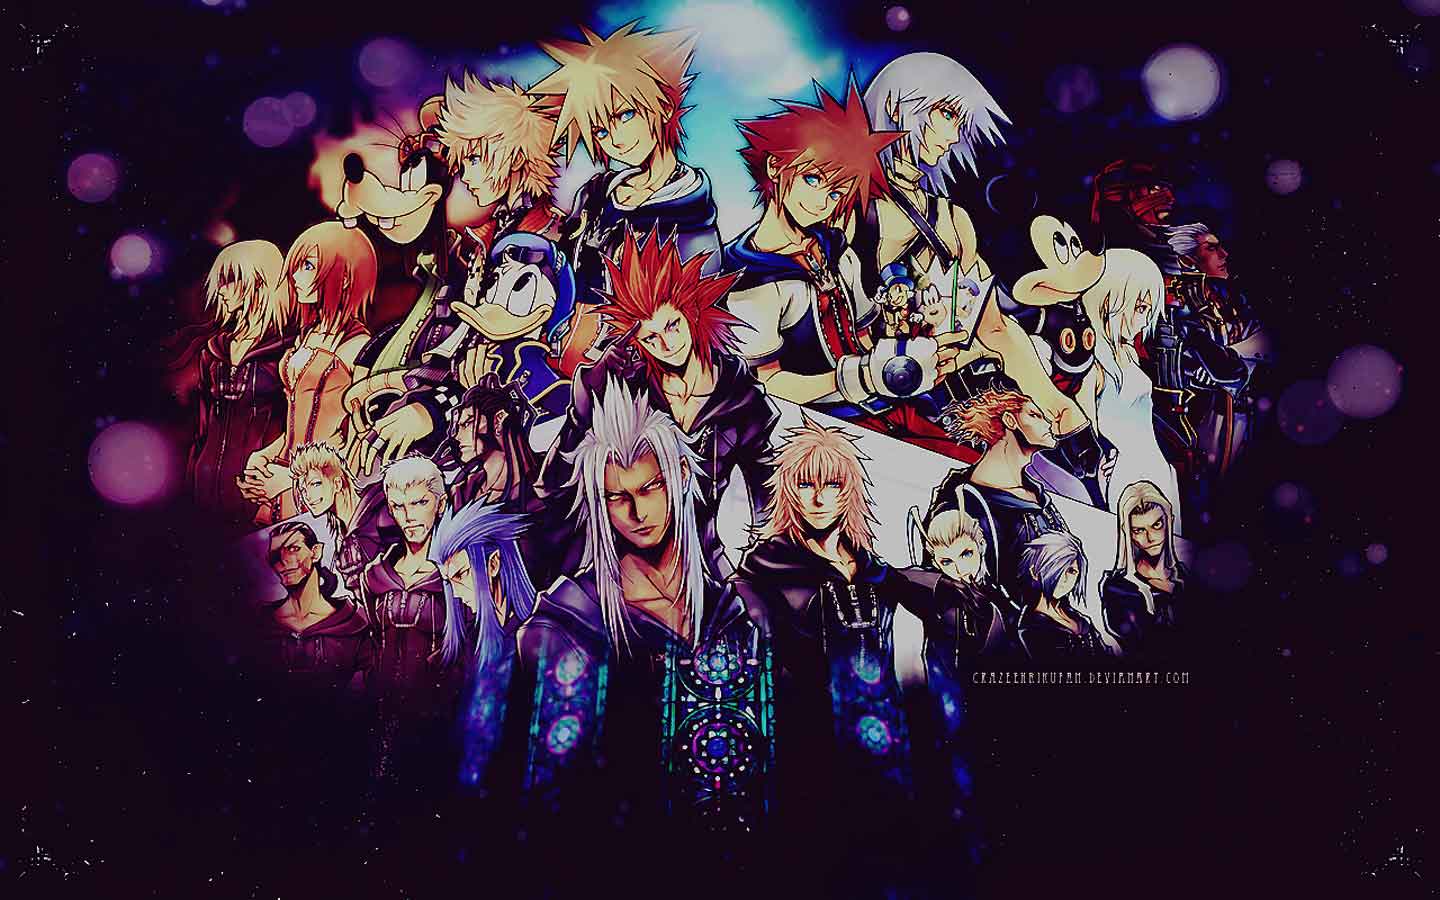 Epic Kingdom Hearts Wallpapers - Top